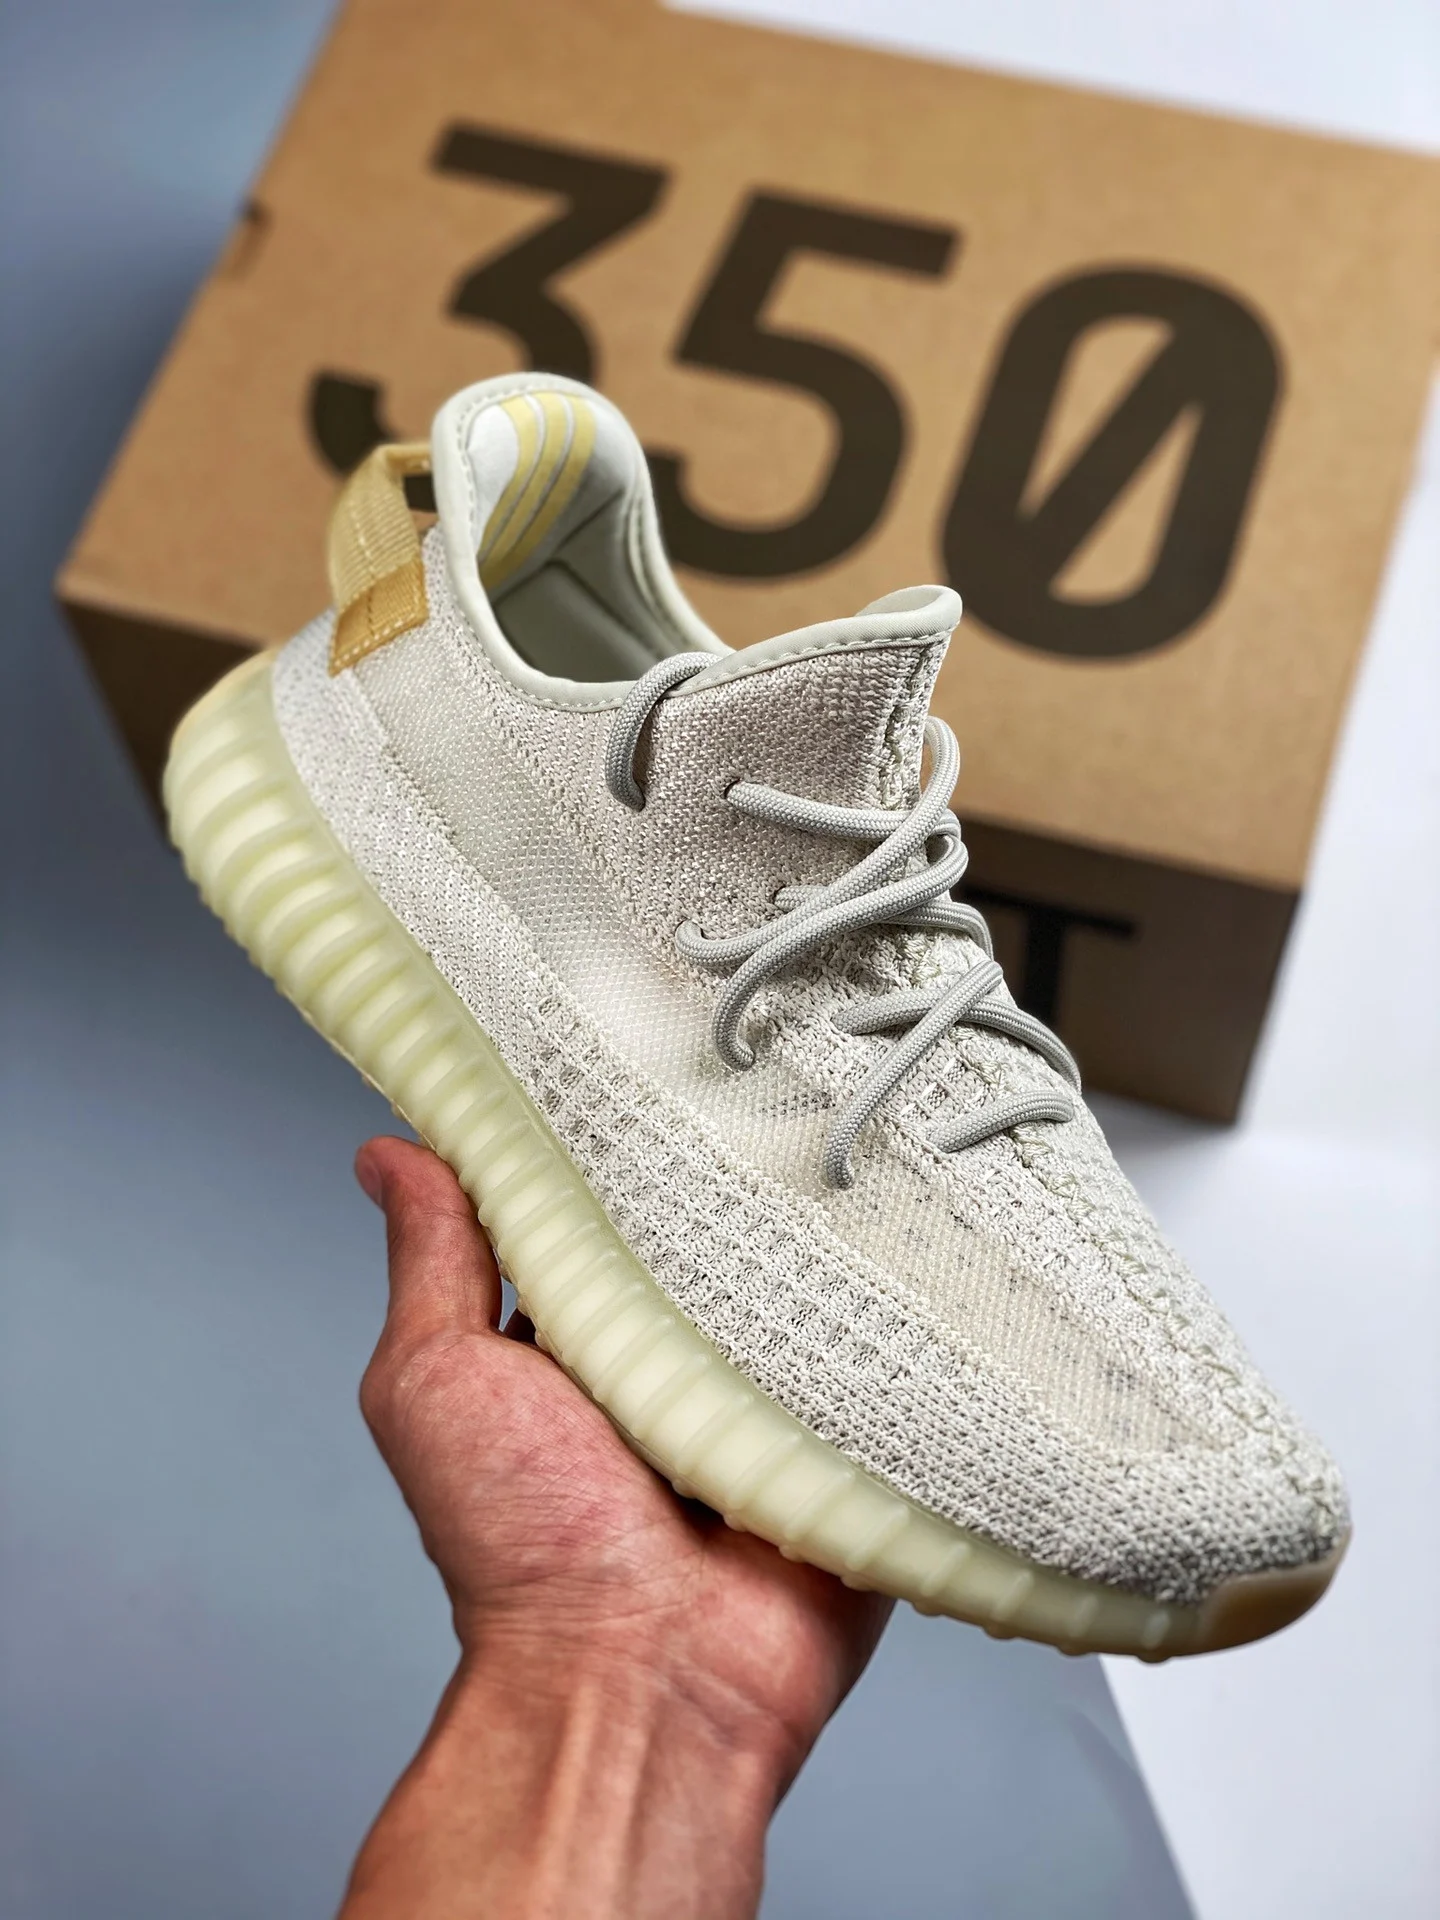 Adidas Yeezy Boost 350 V2 Light GY3438 For Sale